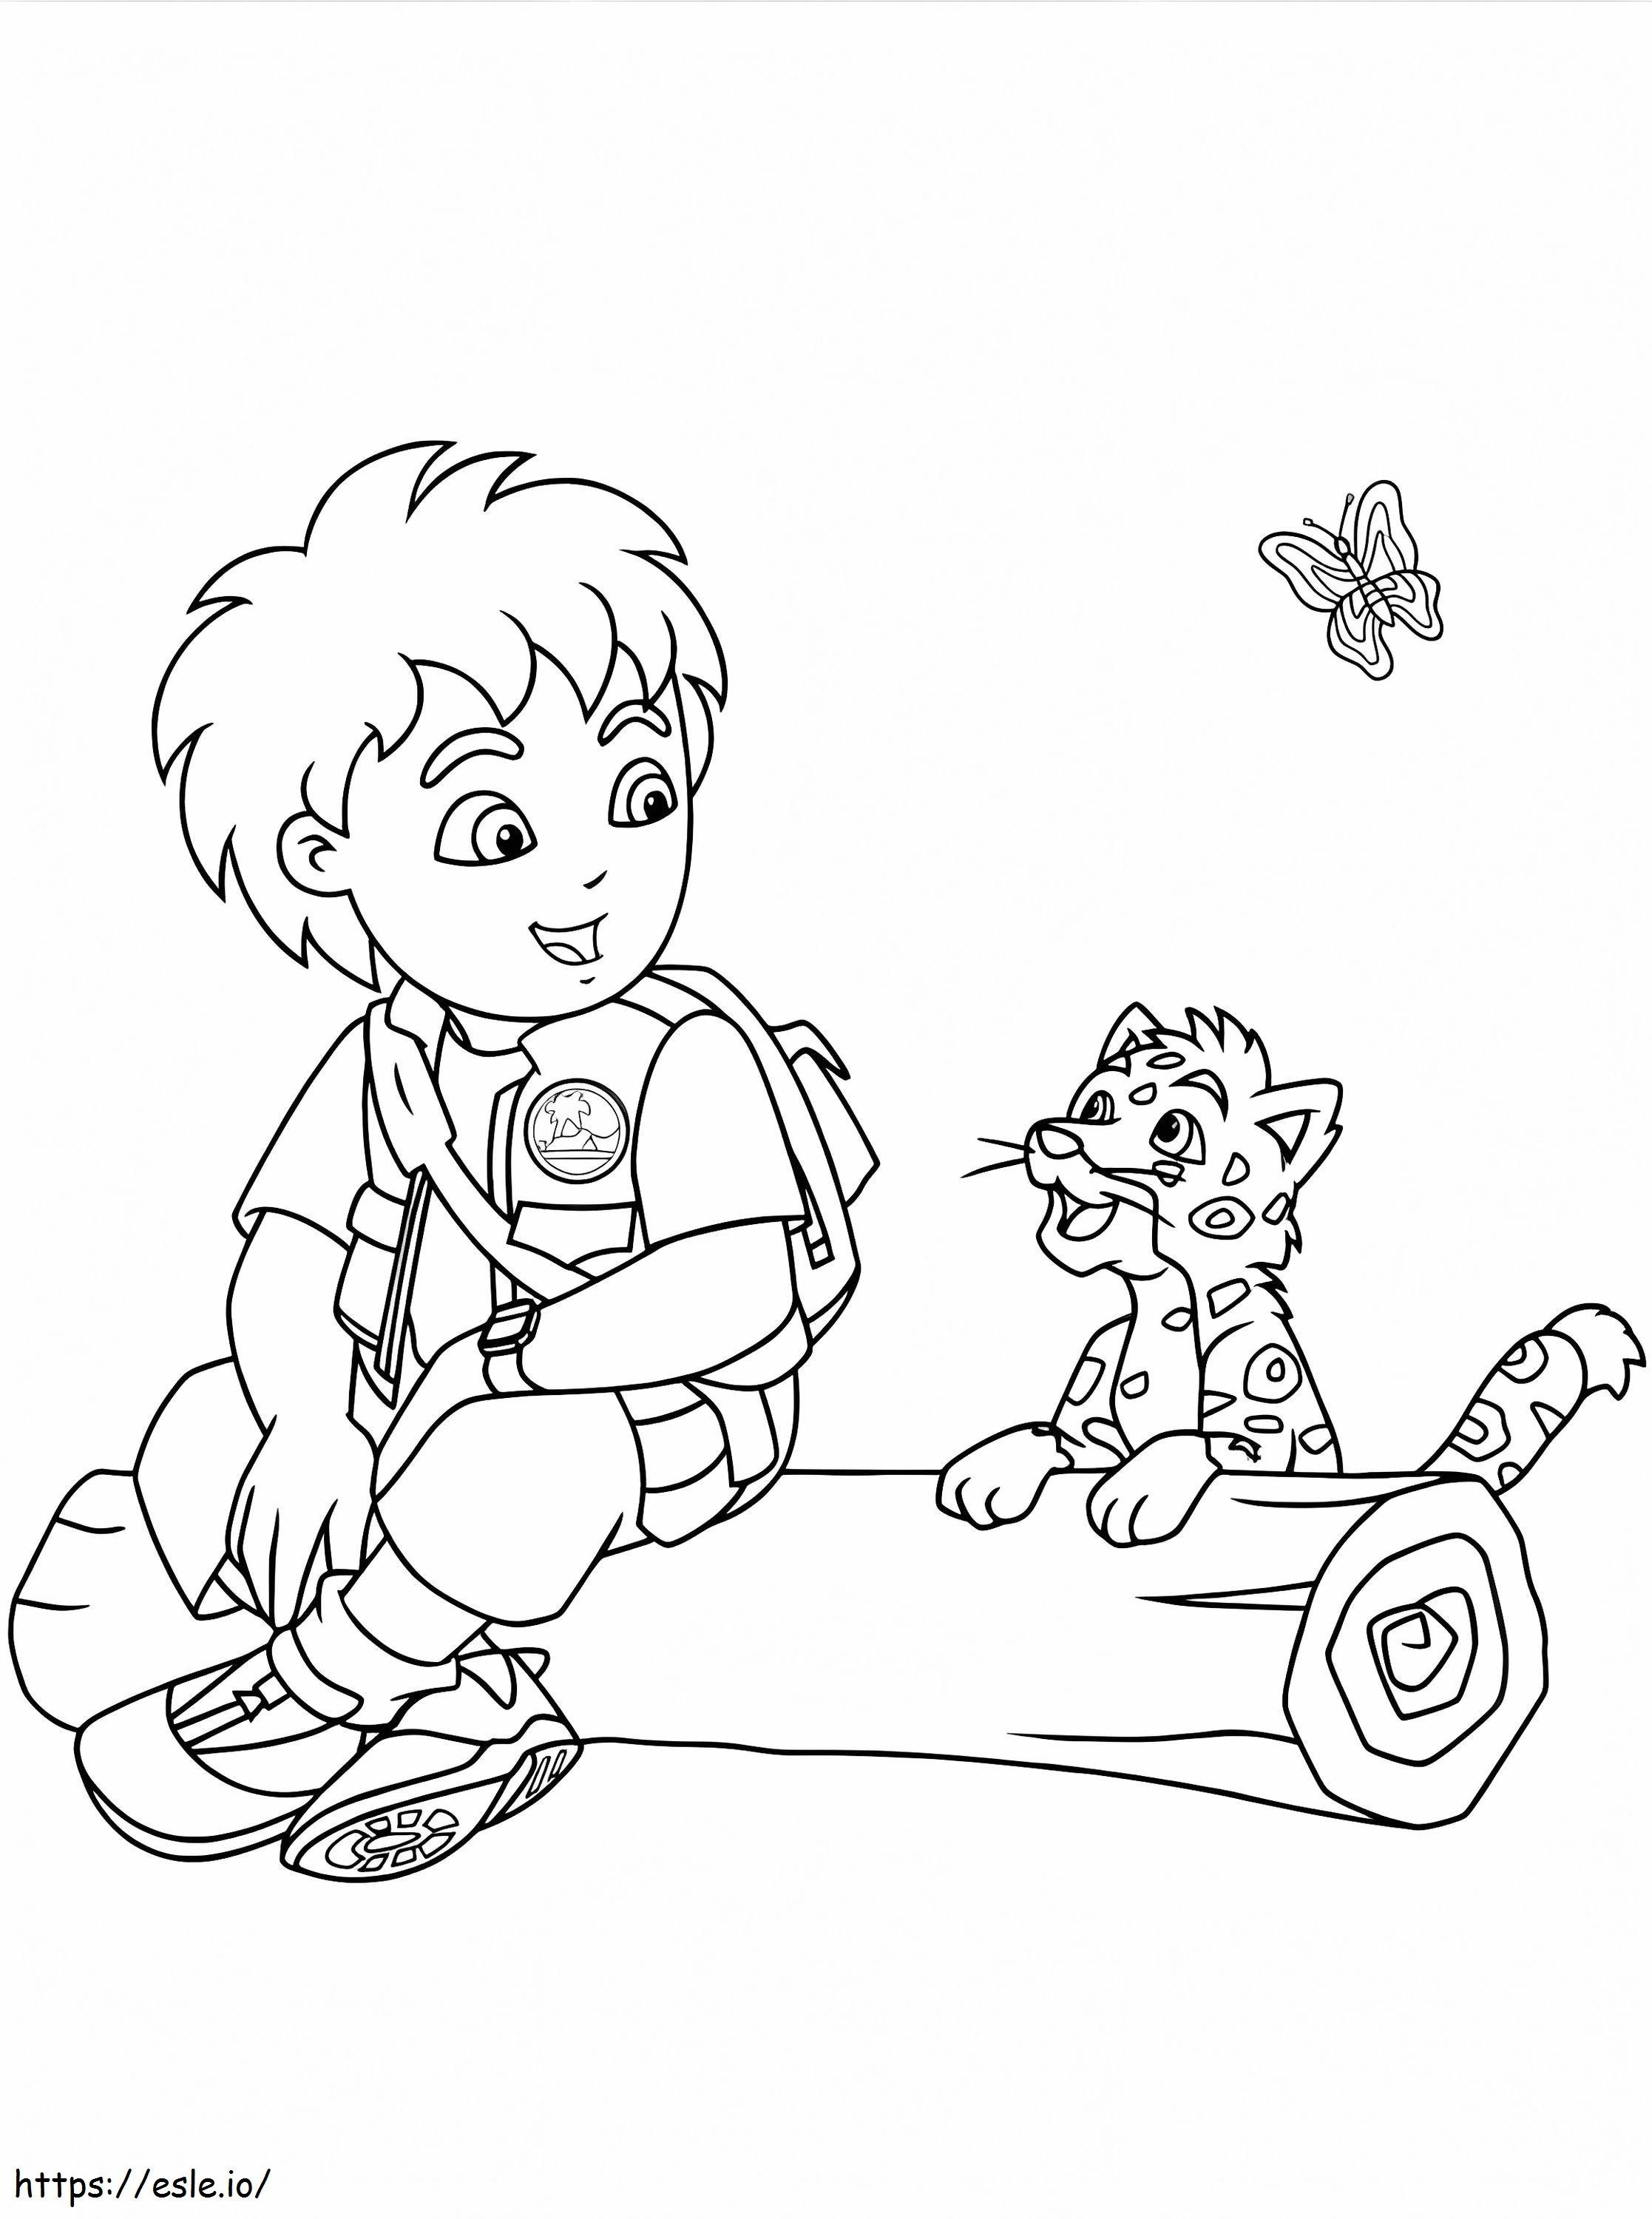 Diego And Baby Jaguar coloring page